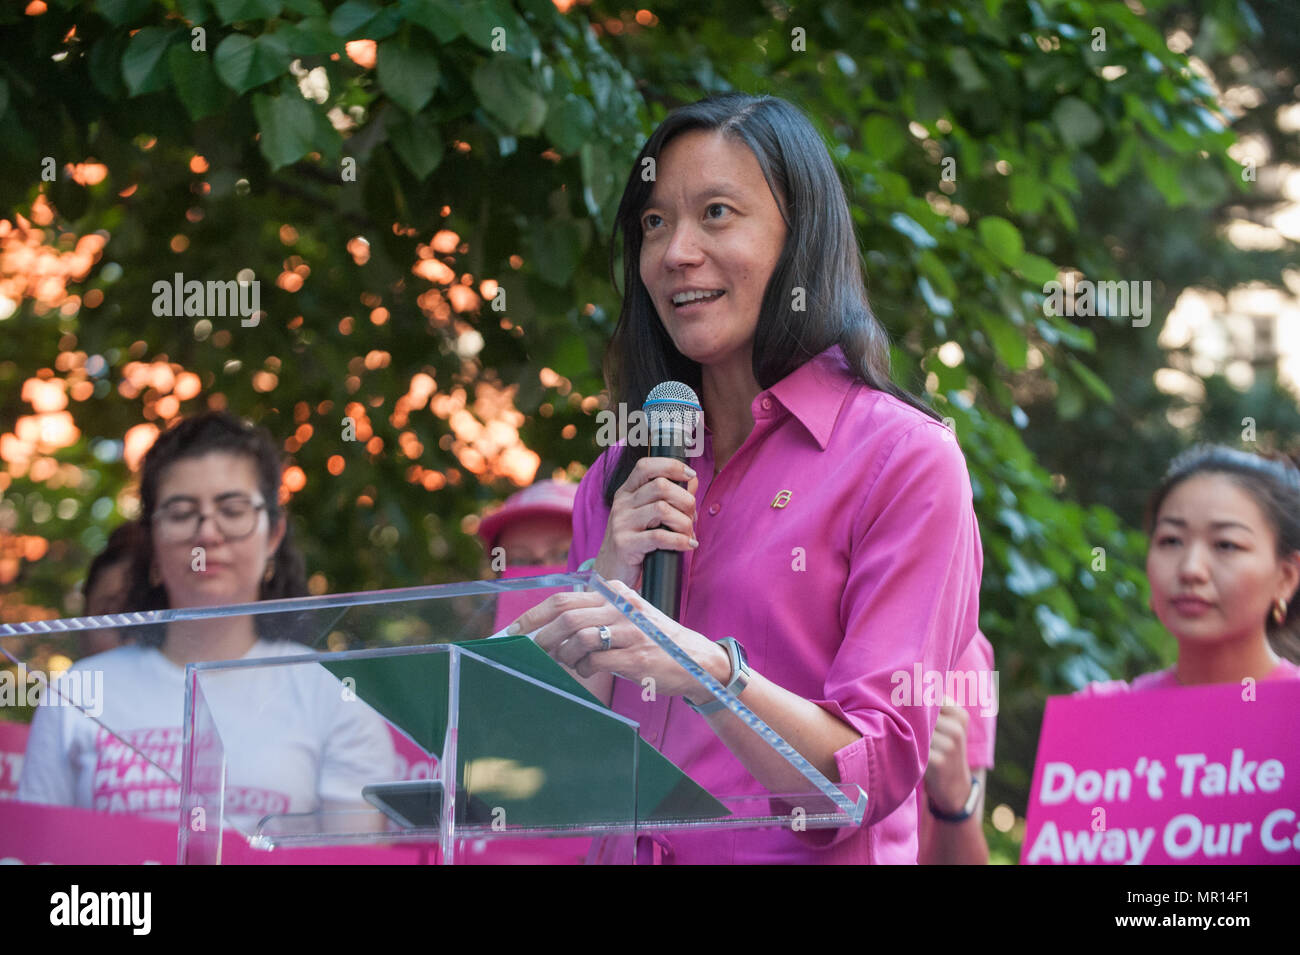 Christina Chang (Planned Parenthood NYC Chief of External Affairs) speaks at Title X (Title Ten) gag rule rally in New York City, hosted by Planned Parenthood of New York City on May 24th 2018, reacting the President Trump's attempt to ban Medicaid and federal funding to medical providers who provide full, legal medical information to patients wanting or needing abortion services. Stock Photo